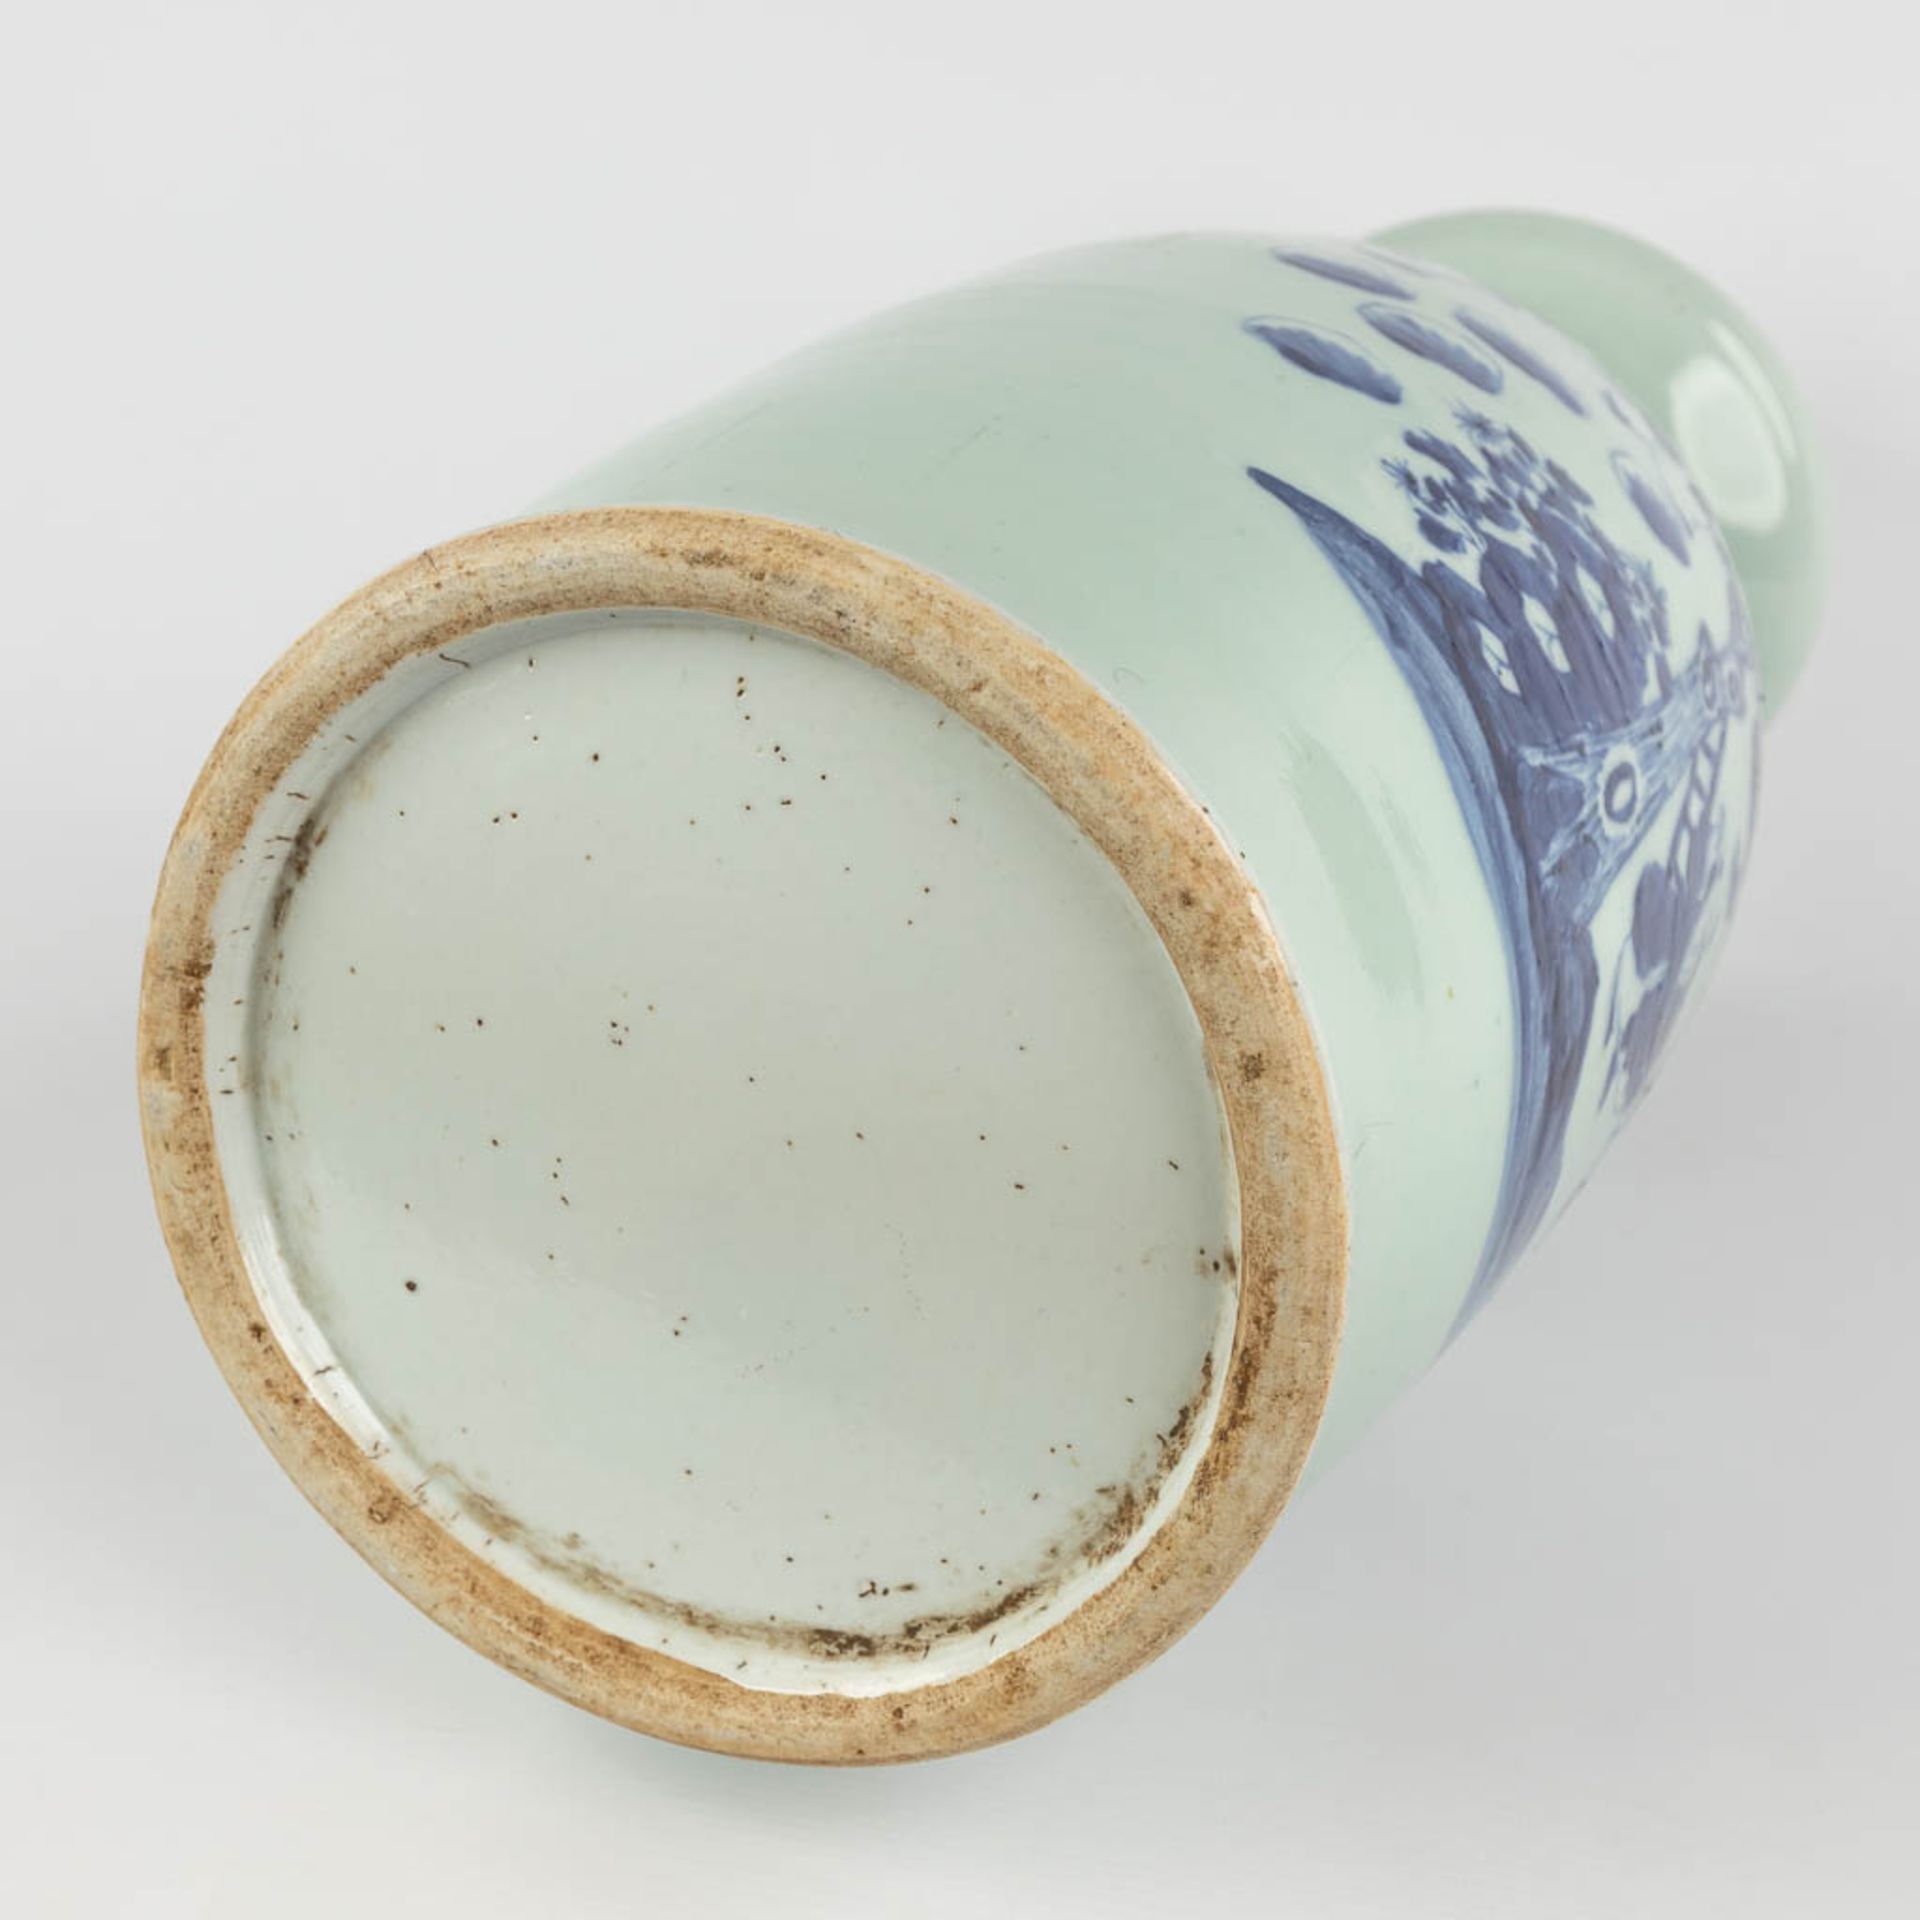 A Chinese celadon vase, blue-white, decorated with wise men. 19th/20th C. (H:59 x D:23 cm) - Image 7 of 16